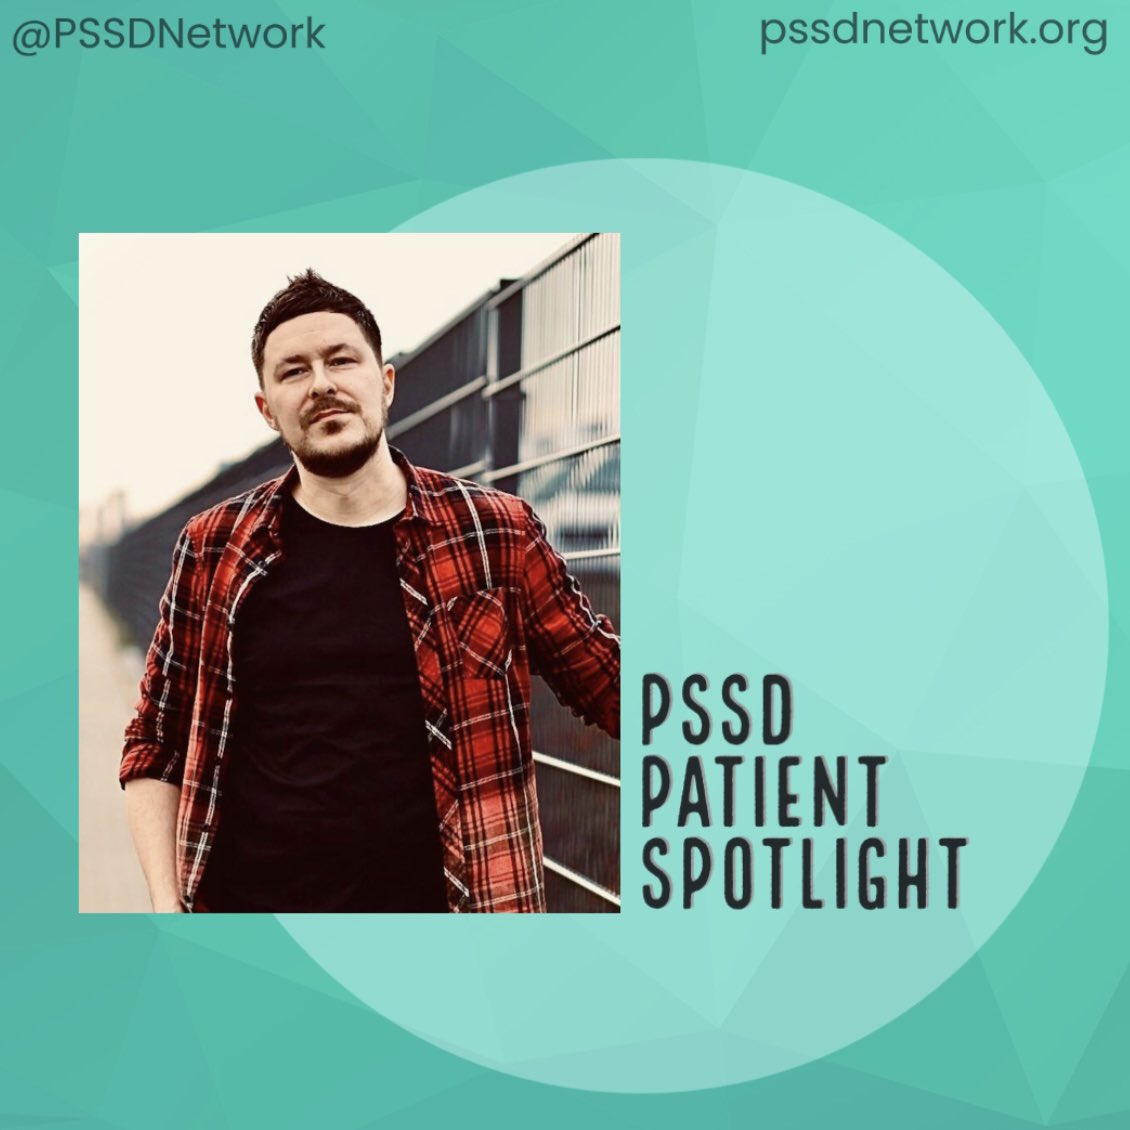 It is with heavy hearts that we acknowledge the recent passing of a member within the PSSD community: 

Julian, 38 years old from Germany. 

Julian wanted to live, but he felt his life was destroyed by PSSD. He could not go on any longer. 

We send our condolences to his family